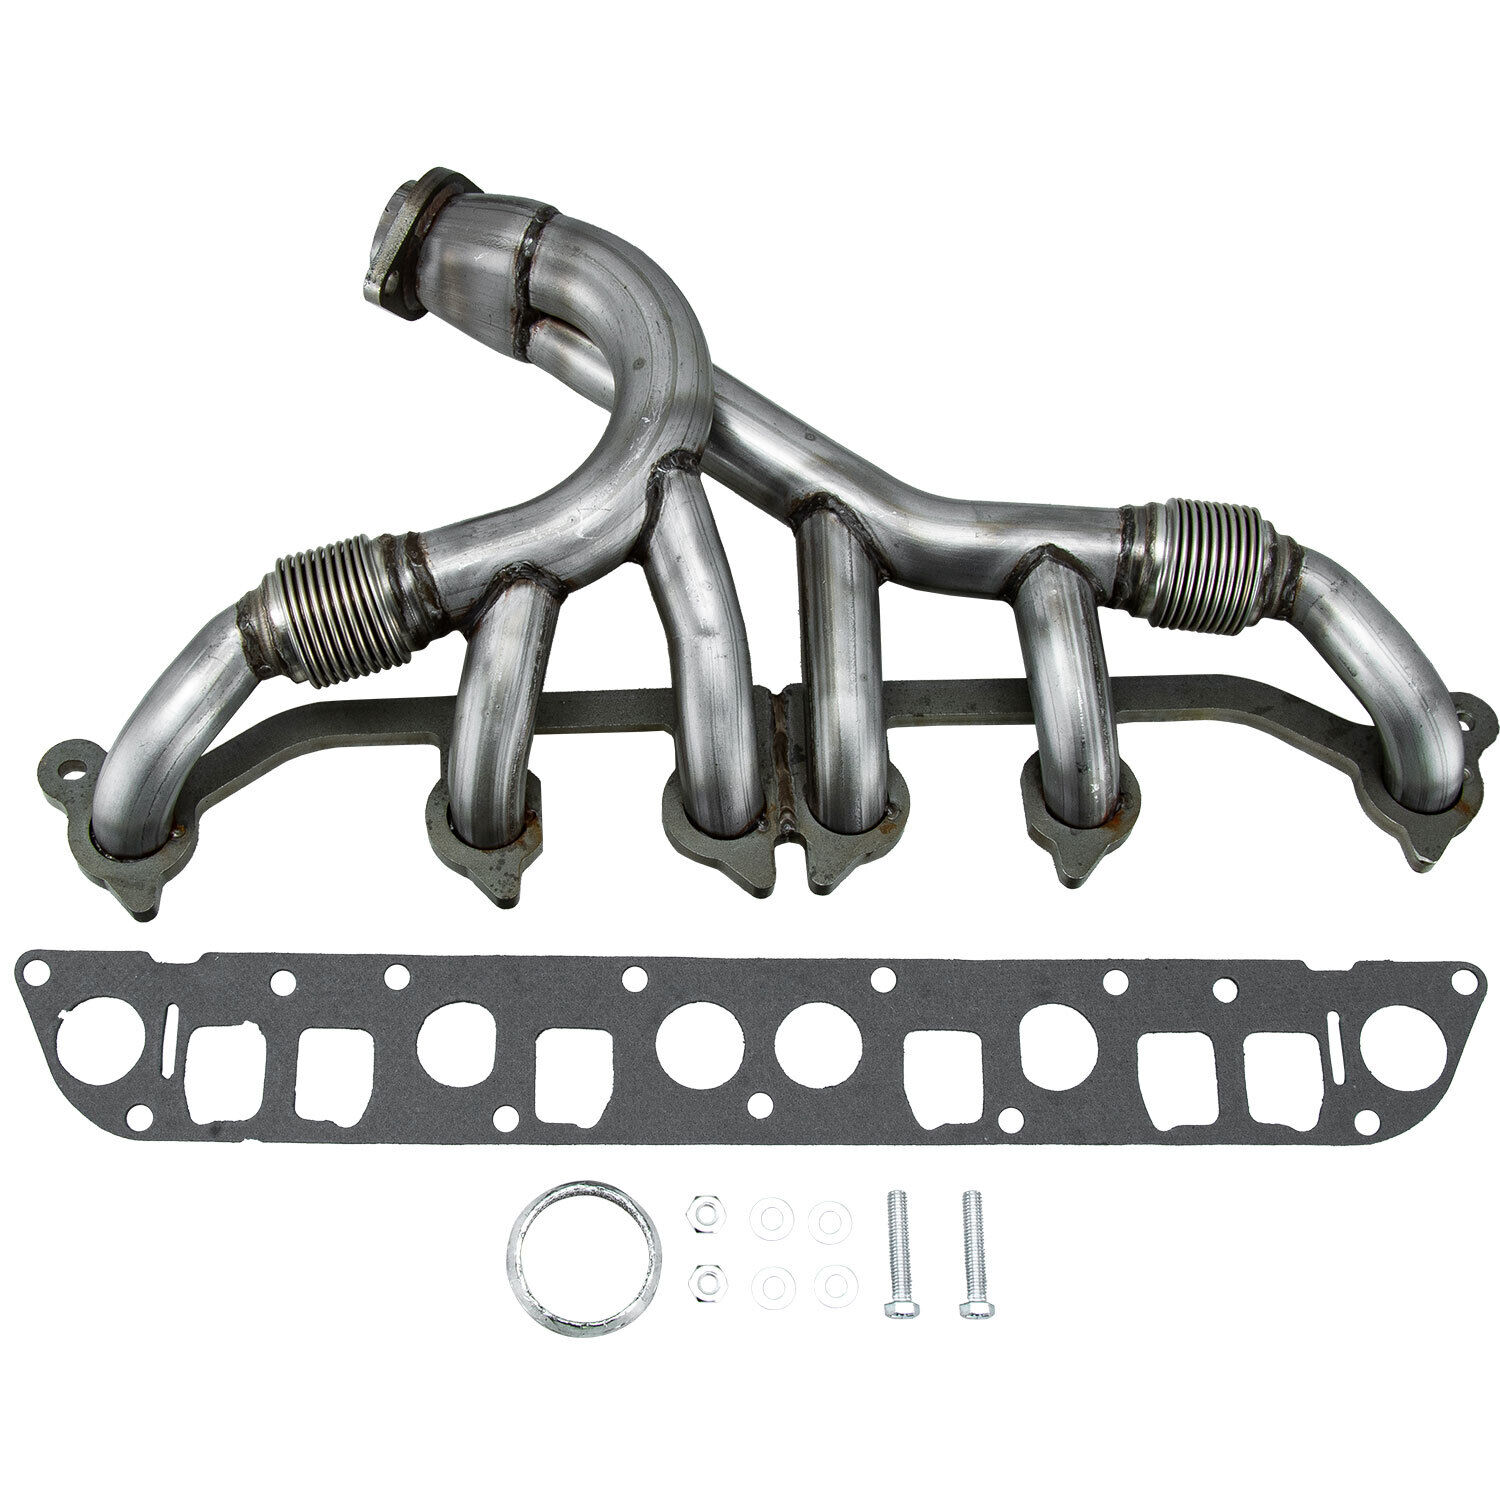 Stainless Steel Exhaust Manifold For Jeep Grand Cherokee Wrangler 4.0L V6 91-99